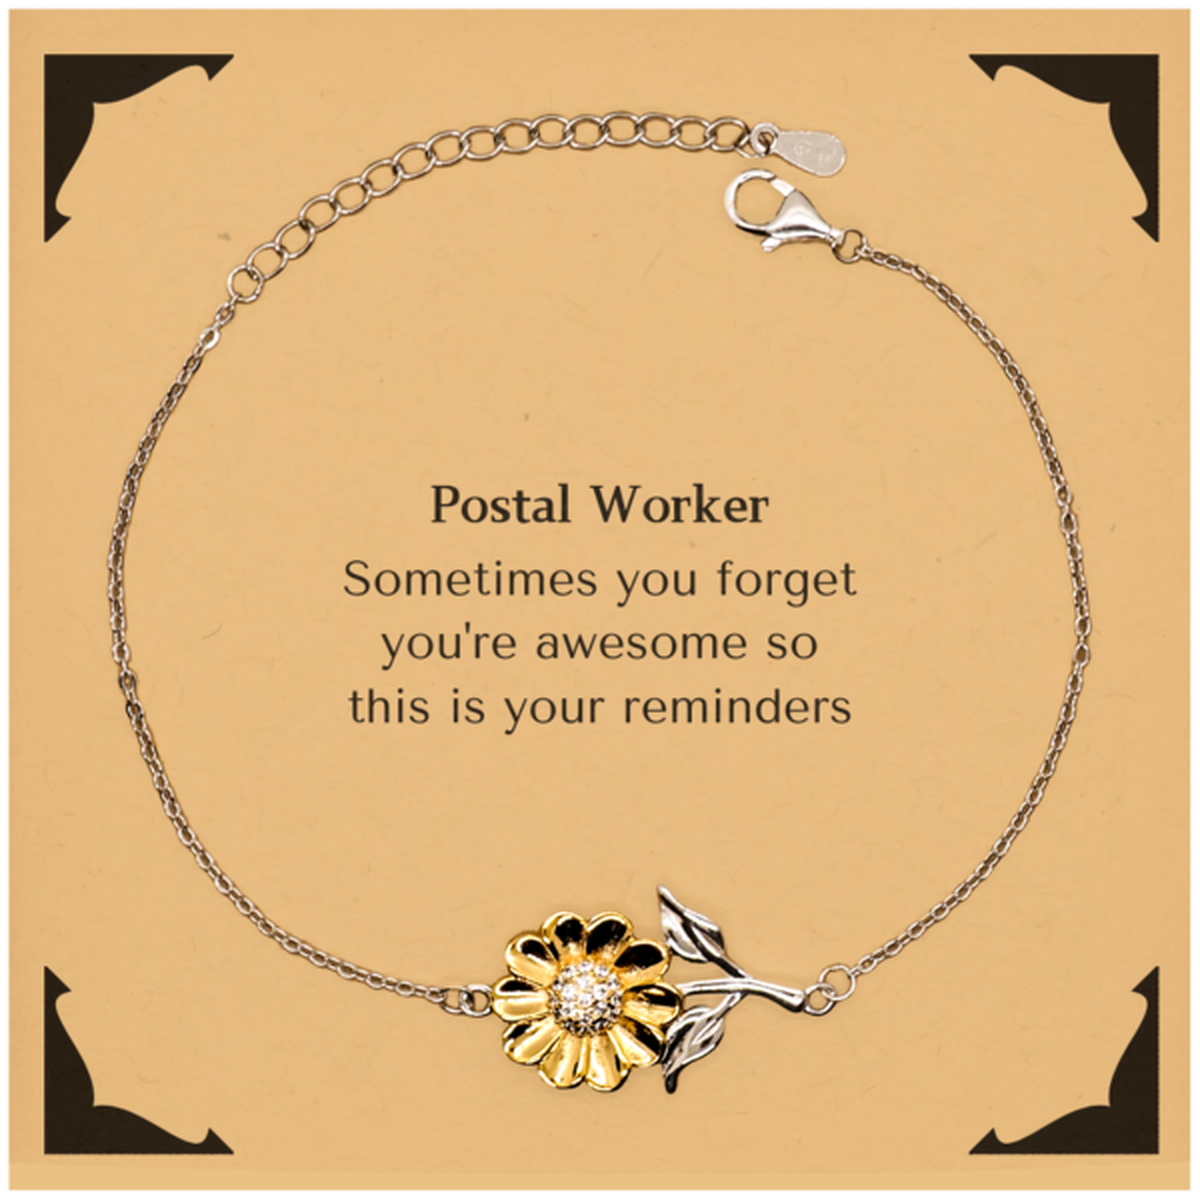 Sentimental Postal Worker Sunflower Bracelet, Postal Worker Sometimes you forget you're awesome so this is your reminders, Graduation Christmas Birthday Gifts for Postal Worker, Men, Women, Coworkers